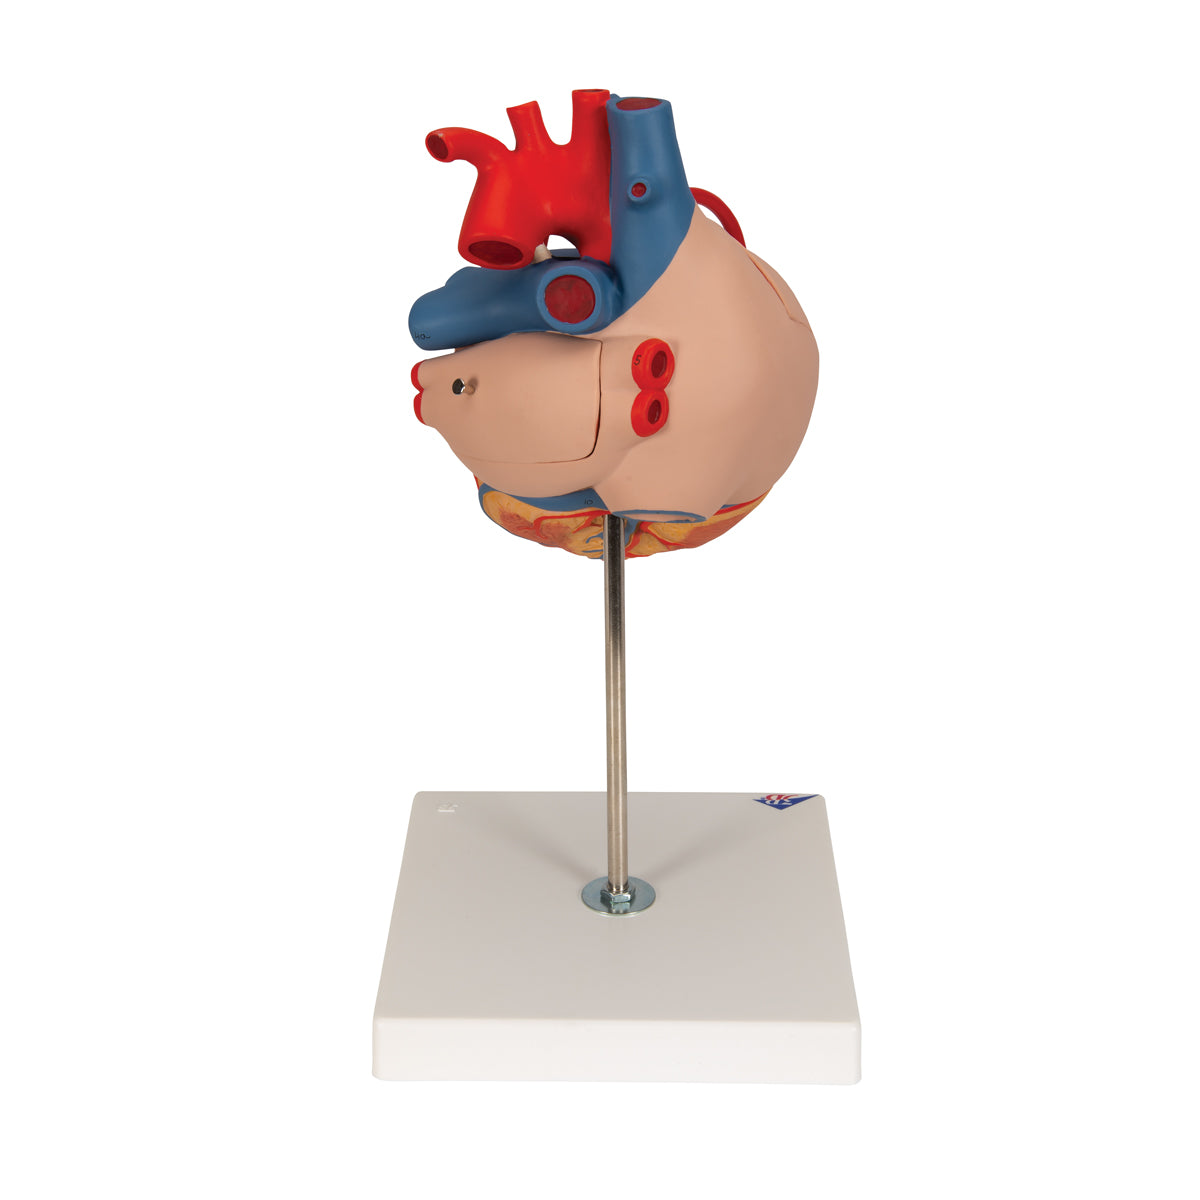 Enlarged heart model showing the result after bypass surgery